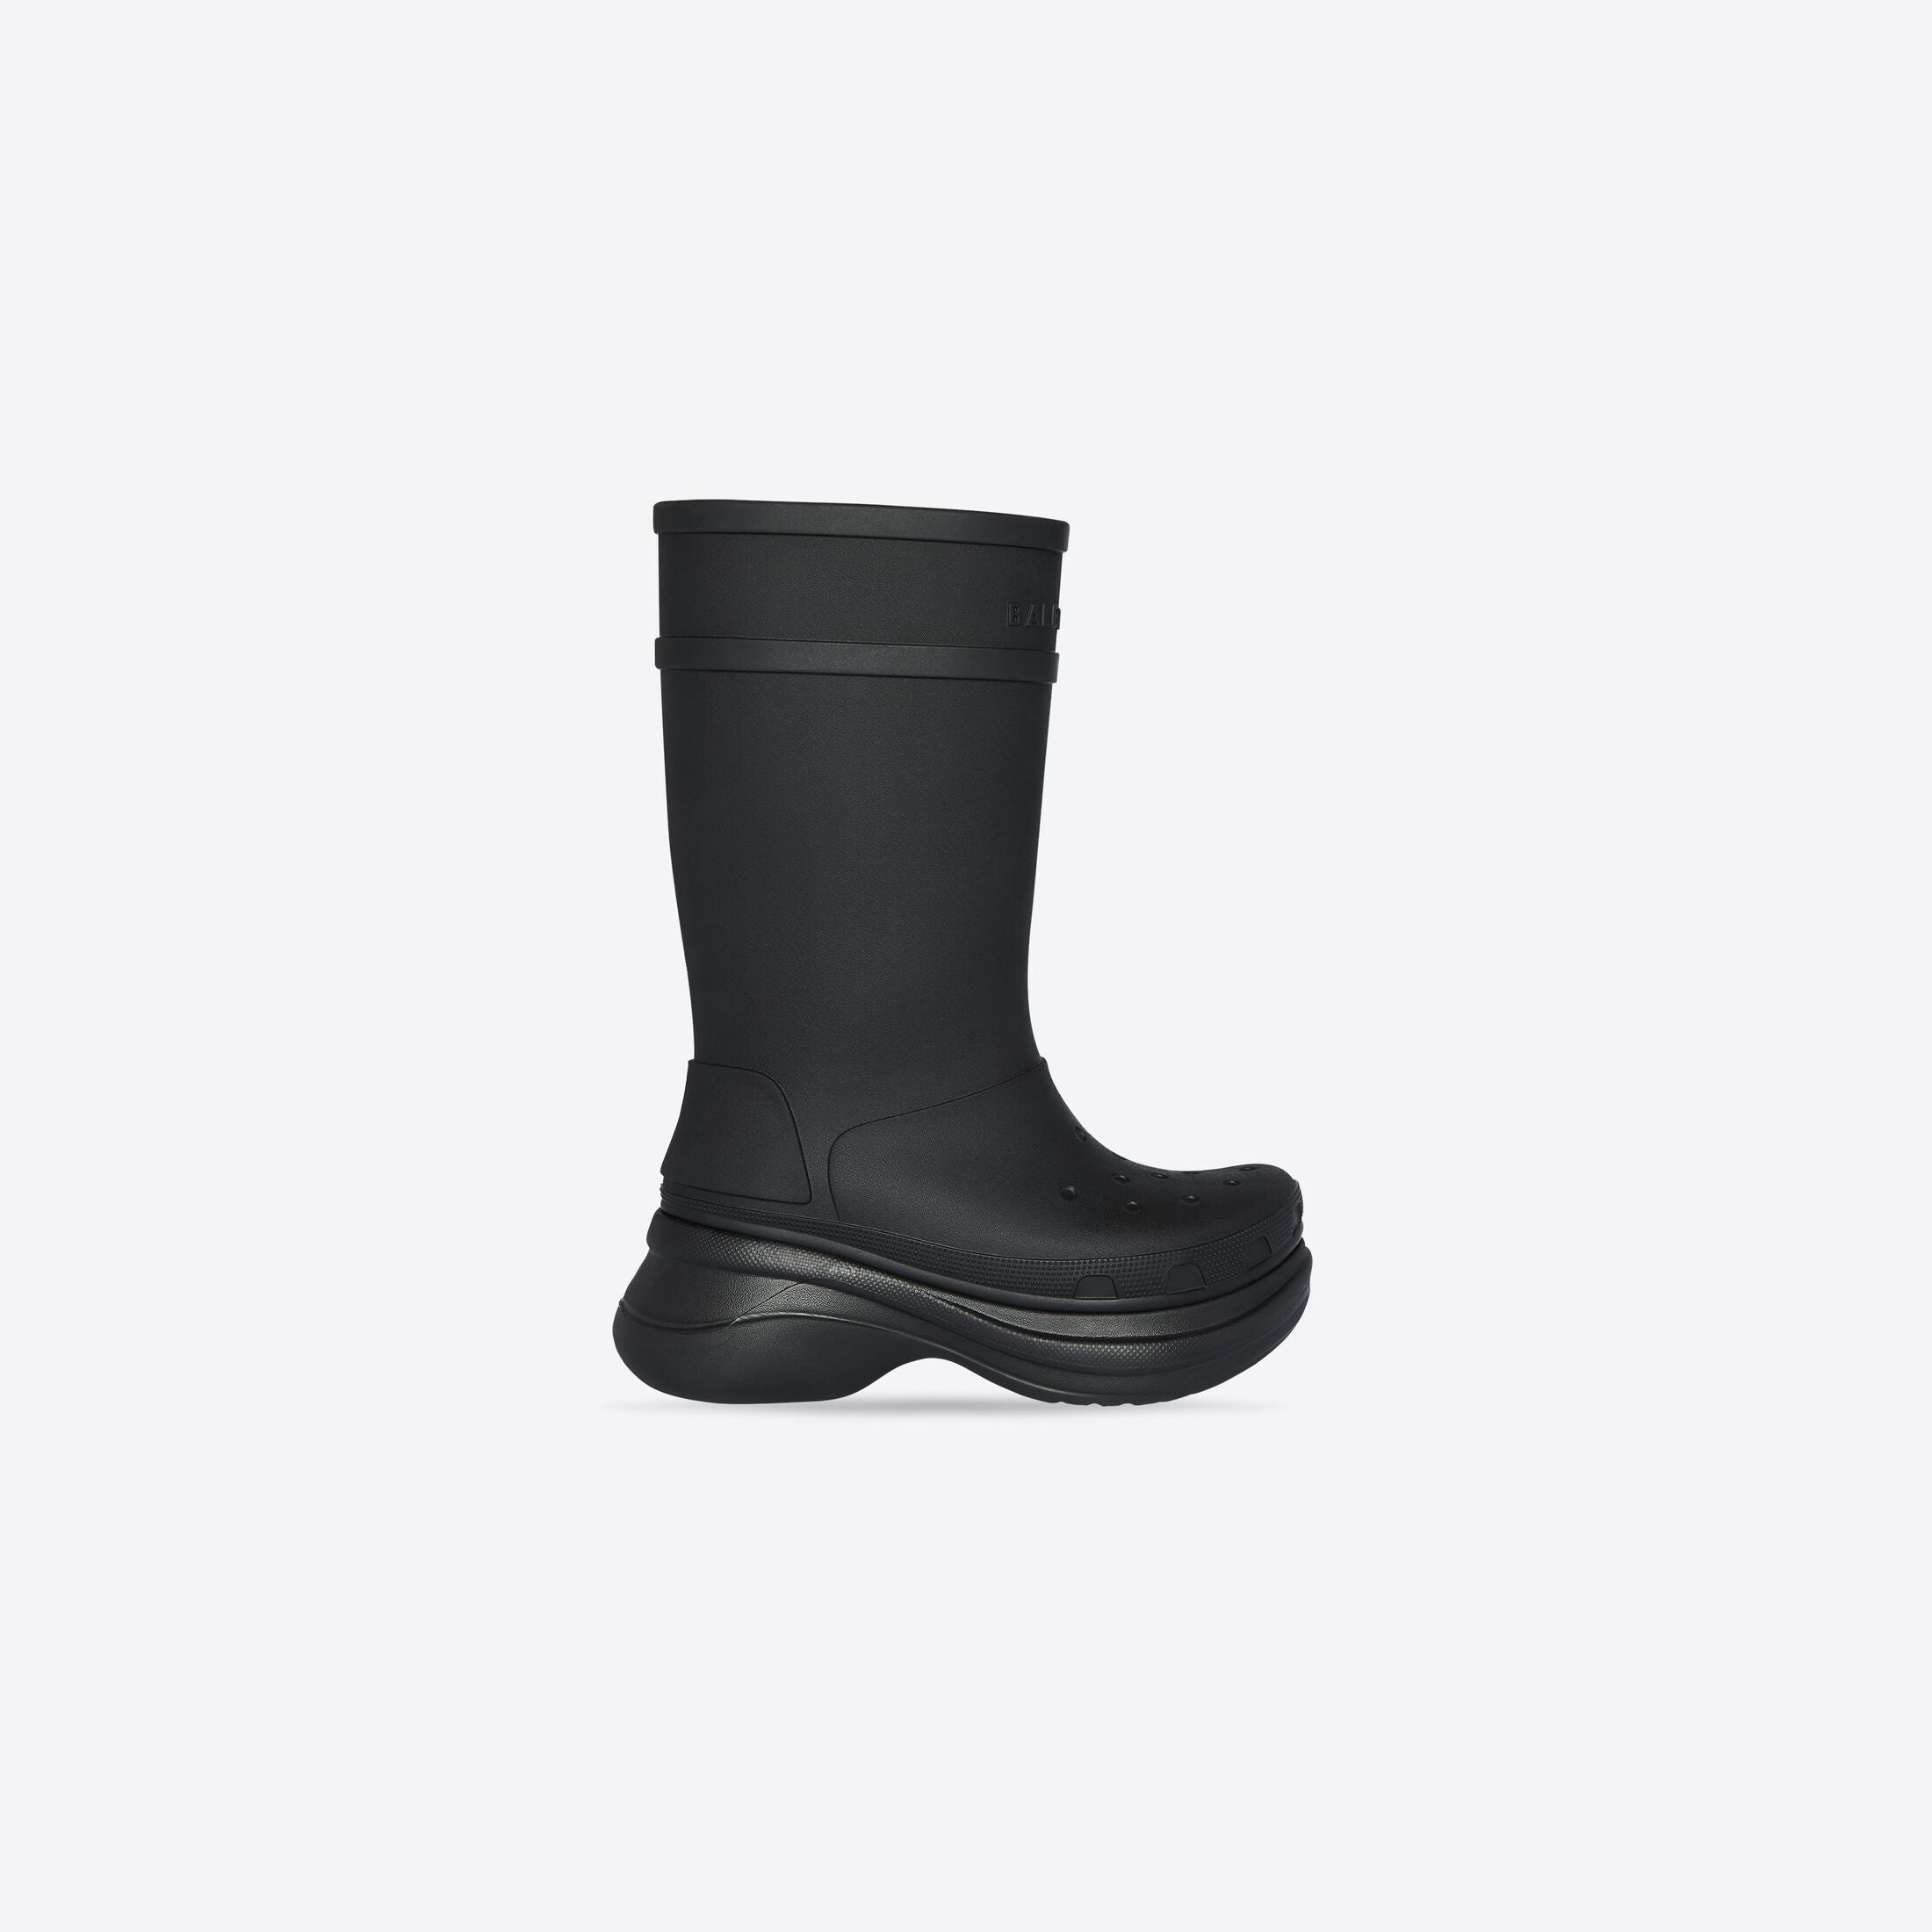 Can You Stand The Rain? With These 15 Luxury Rubber Boots You Certainly Can